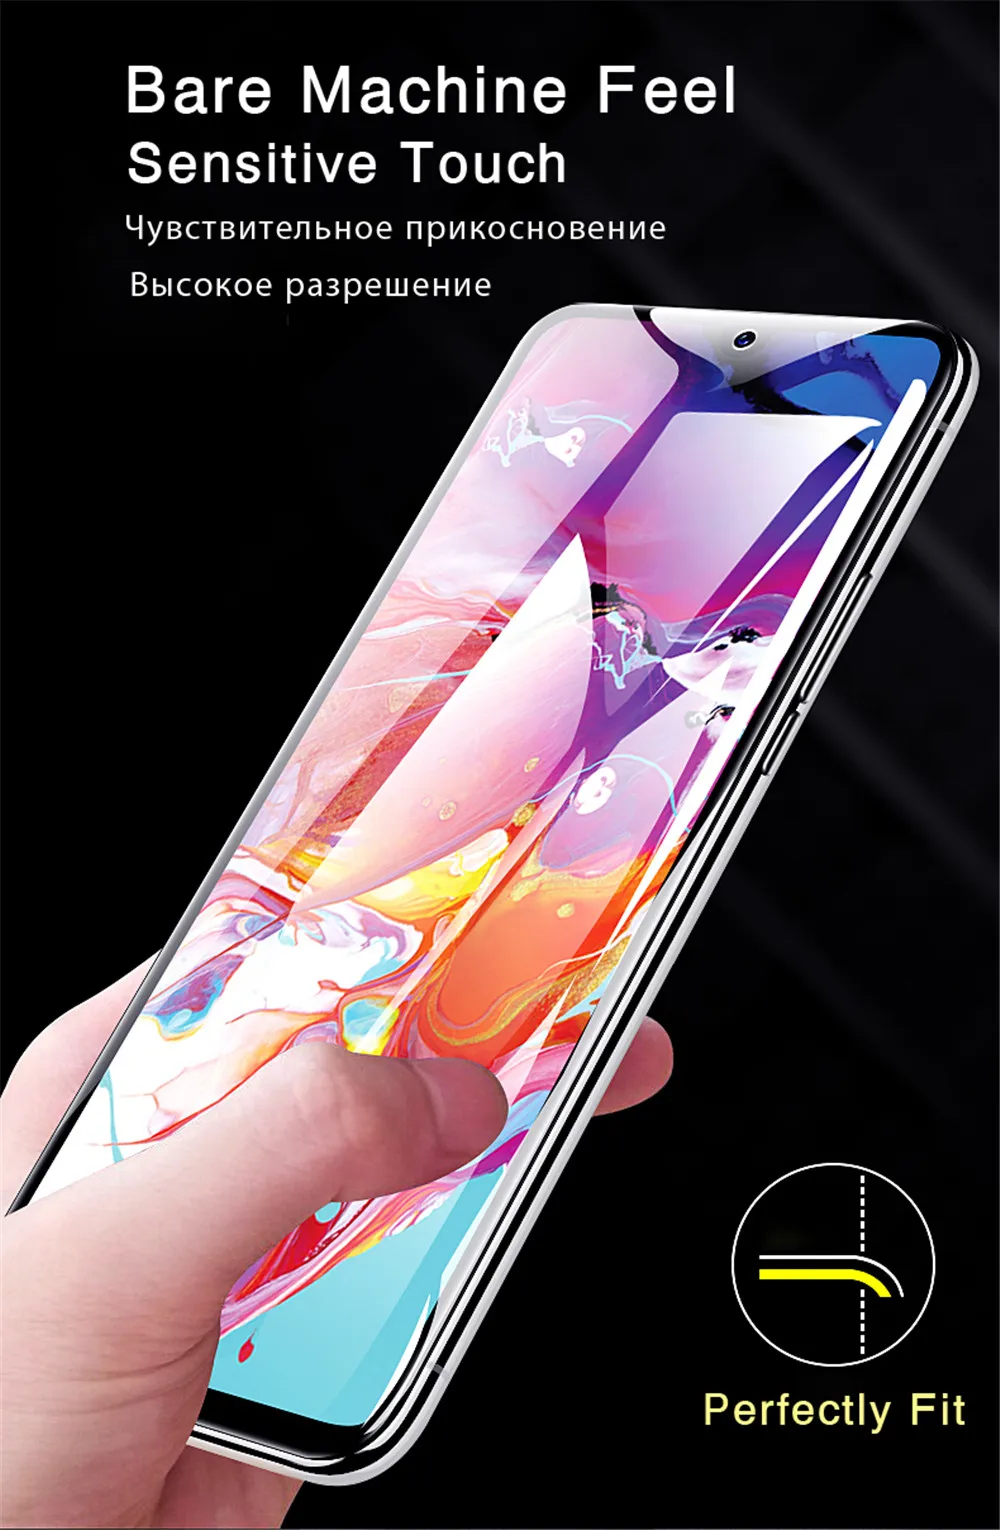 25D Screen Protector For Samsung Galaxy A50 A70 S7 S8 S9 S10 Plus Hydrogel Film For Samsung Note 8 9 10 Plus A80 A90 Soft Film